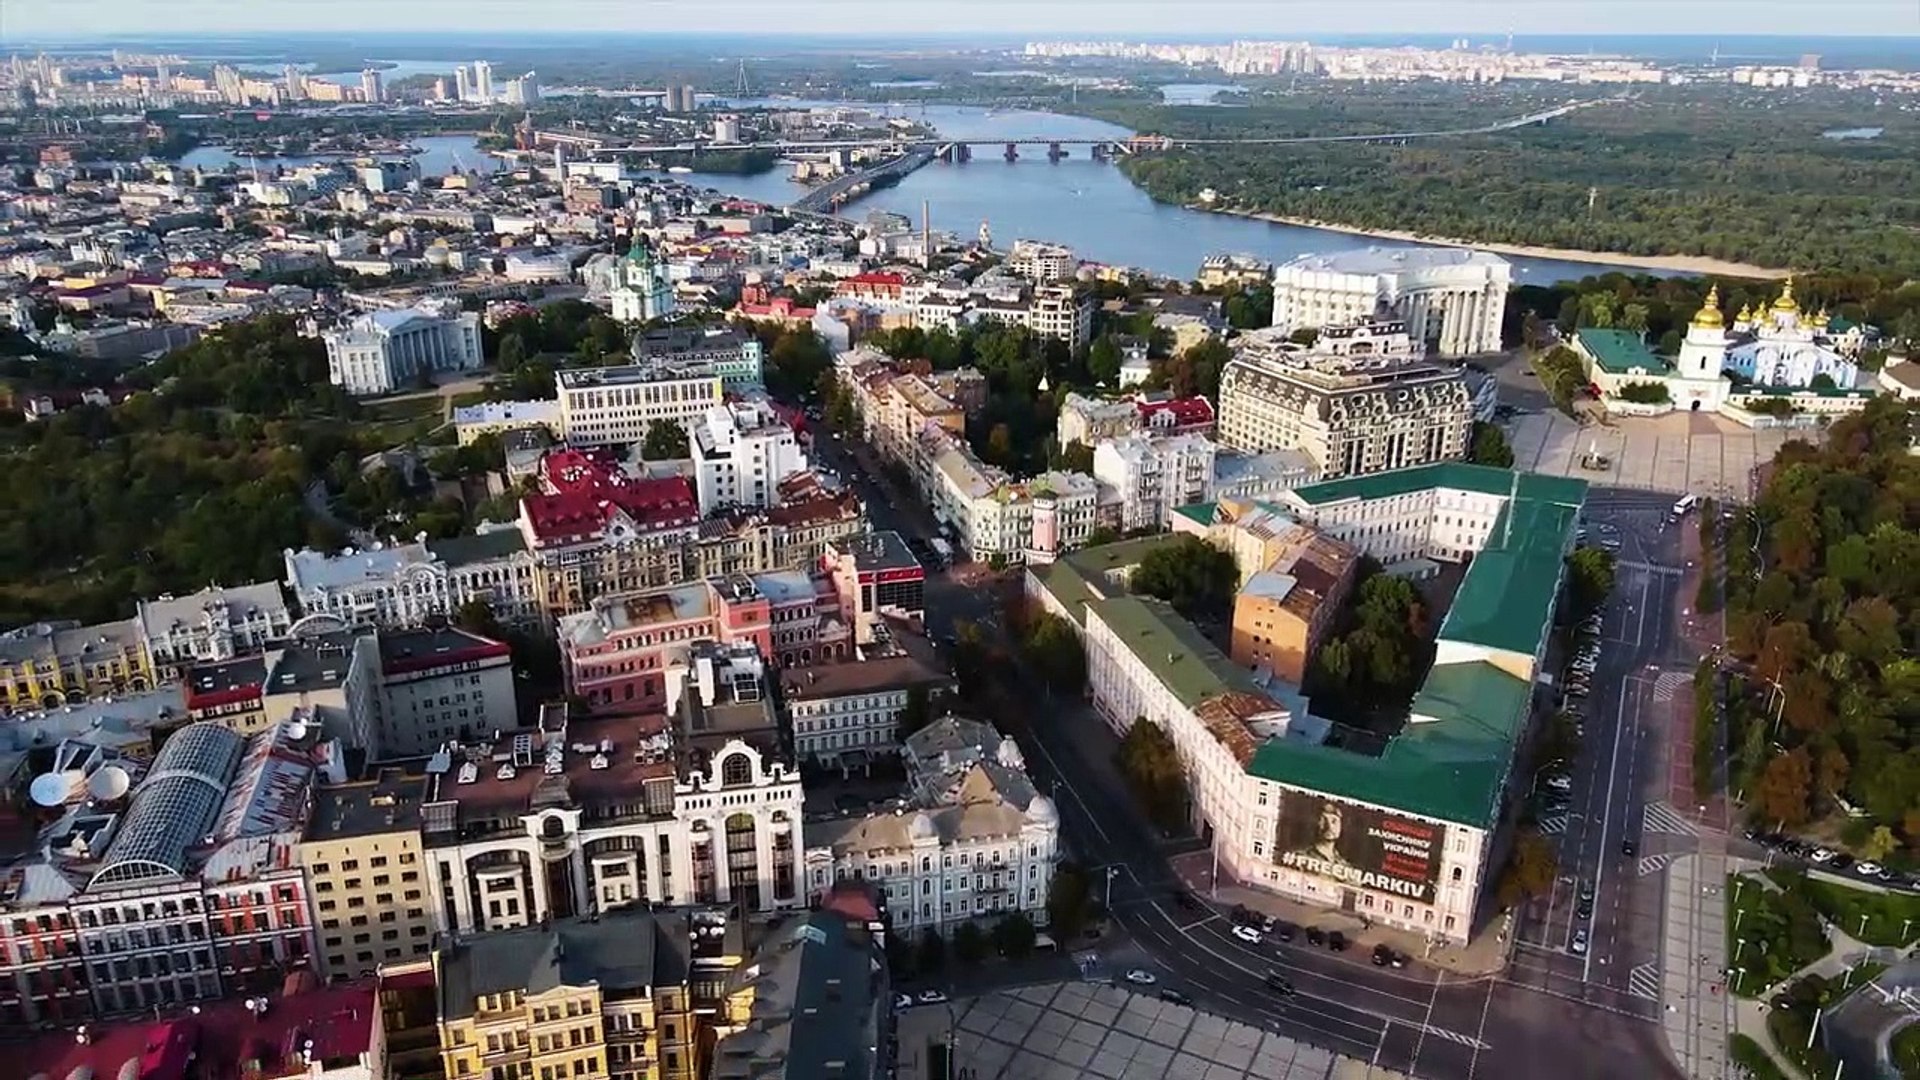 Kyiv (Kiev) in 8K ULTRA HD - The Capital of Ukraine with Relaxing Music